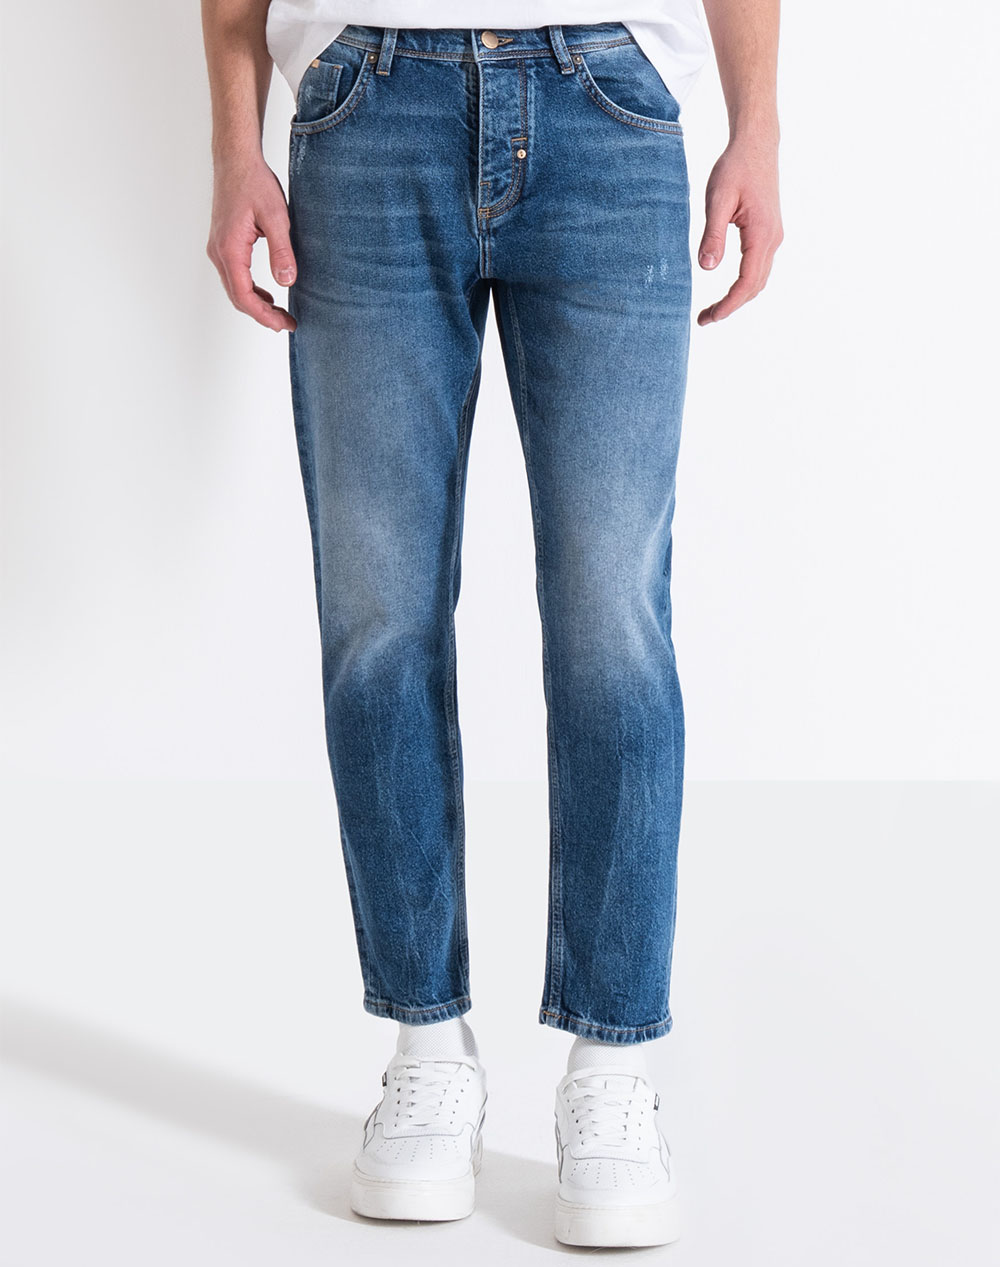 ANTONY MORATO MMDT00264FA7504751W01754 MIN OF 10 JEANS ARGON SLIM ANKLE LENGHT FIT IN BLUE DENIM AUTHENTIC LOOK ΠΑΝΤΕΛΟΝΙ ΑΝΔΡΙΚΟ DT26475475W1754-7010